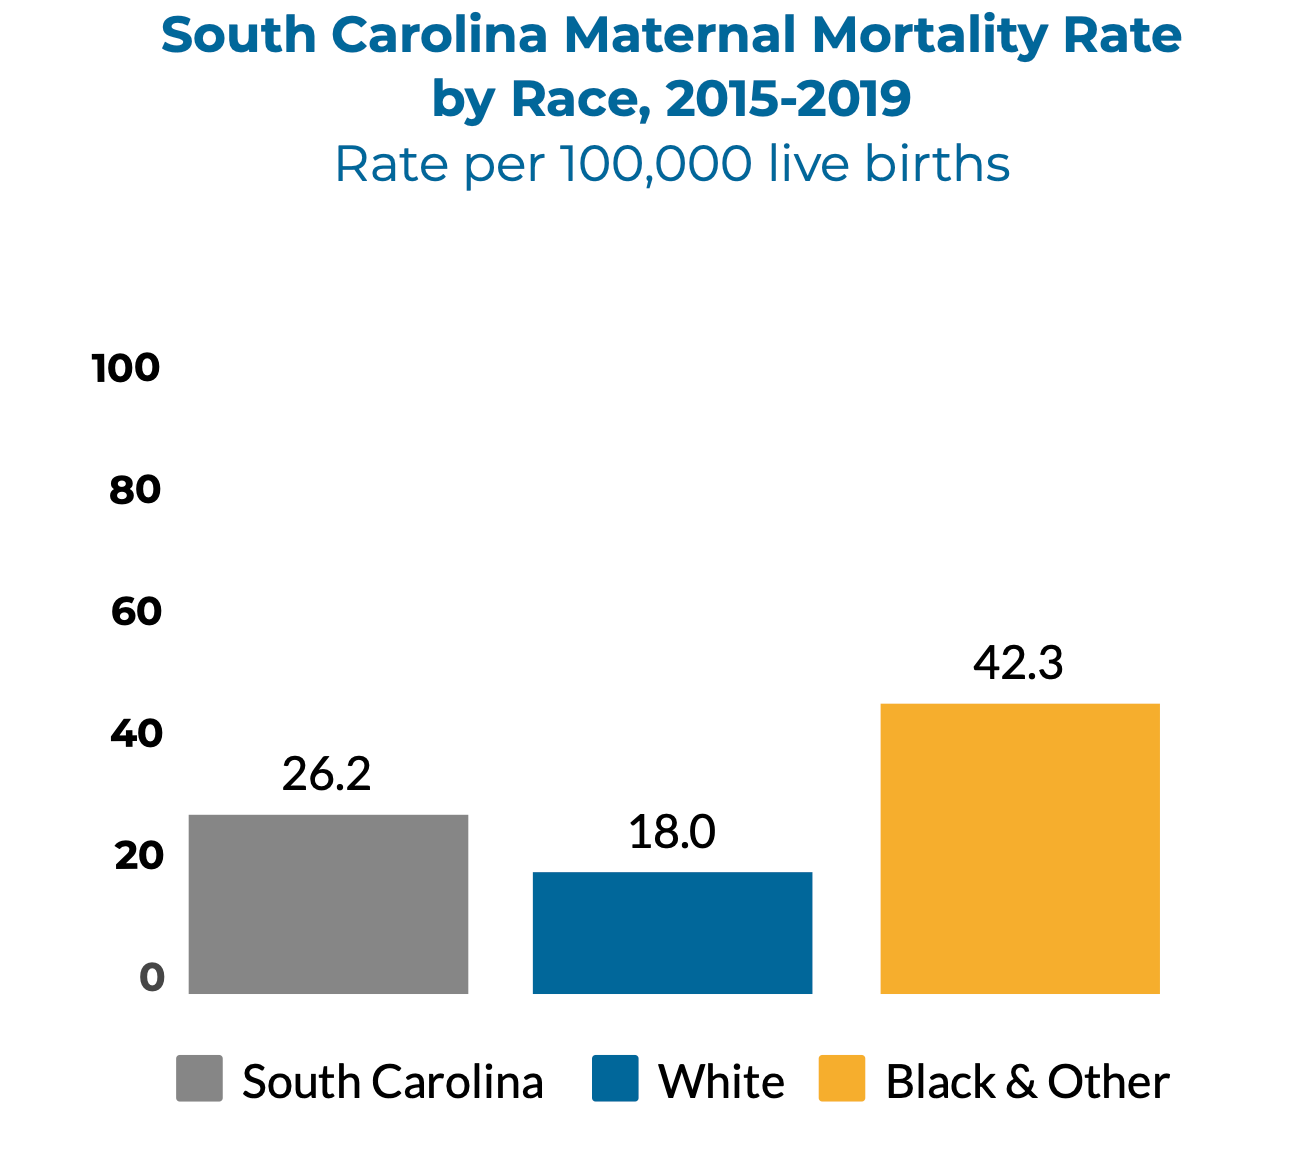 South Carolina Maternal Mortality Rate by Race, 2015-2019 Rate per 100,000 live births, overall rate 26.2, white rate 18, Black and other rate 42.3